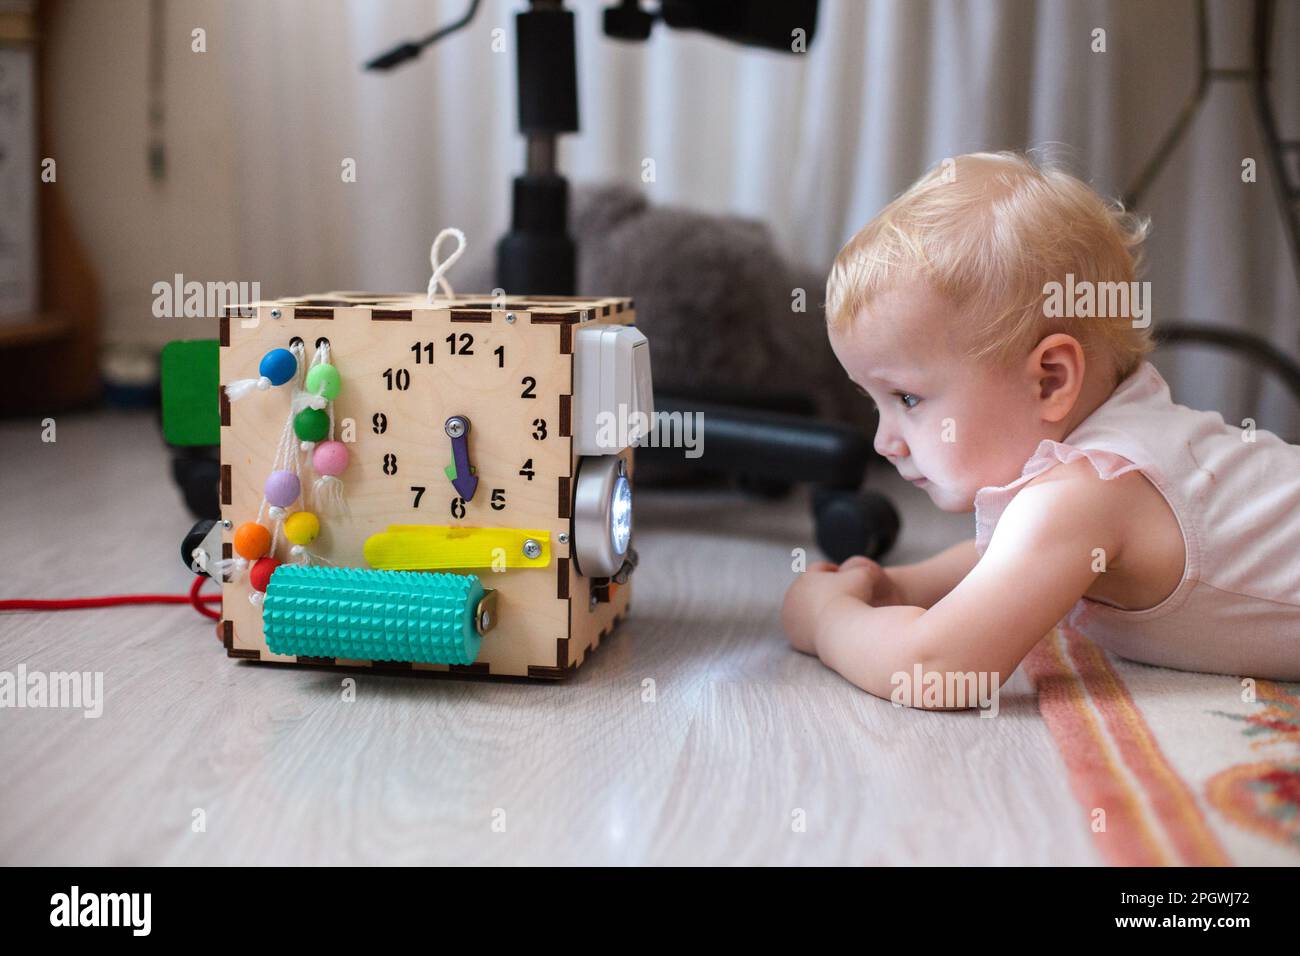 Activity Board. The baby learns the numbers on the clock on the bisiboard. Early development of children with a playful wooden cube toy Montessori. Stock Photo